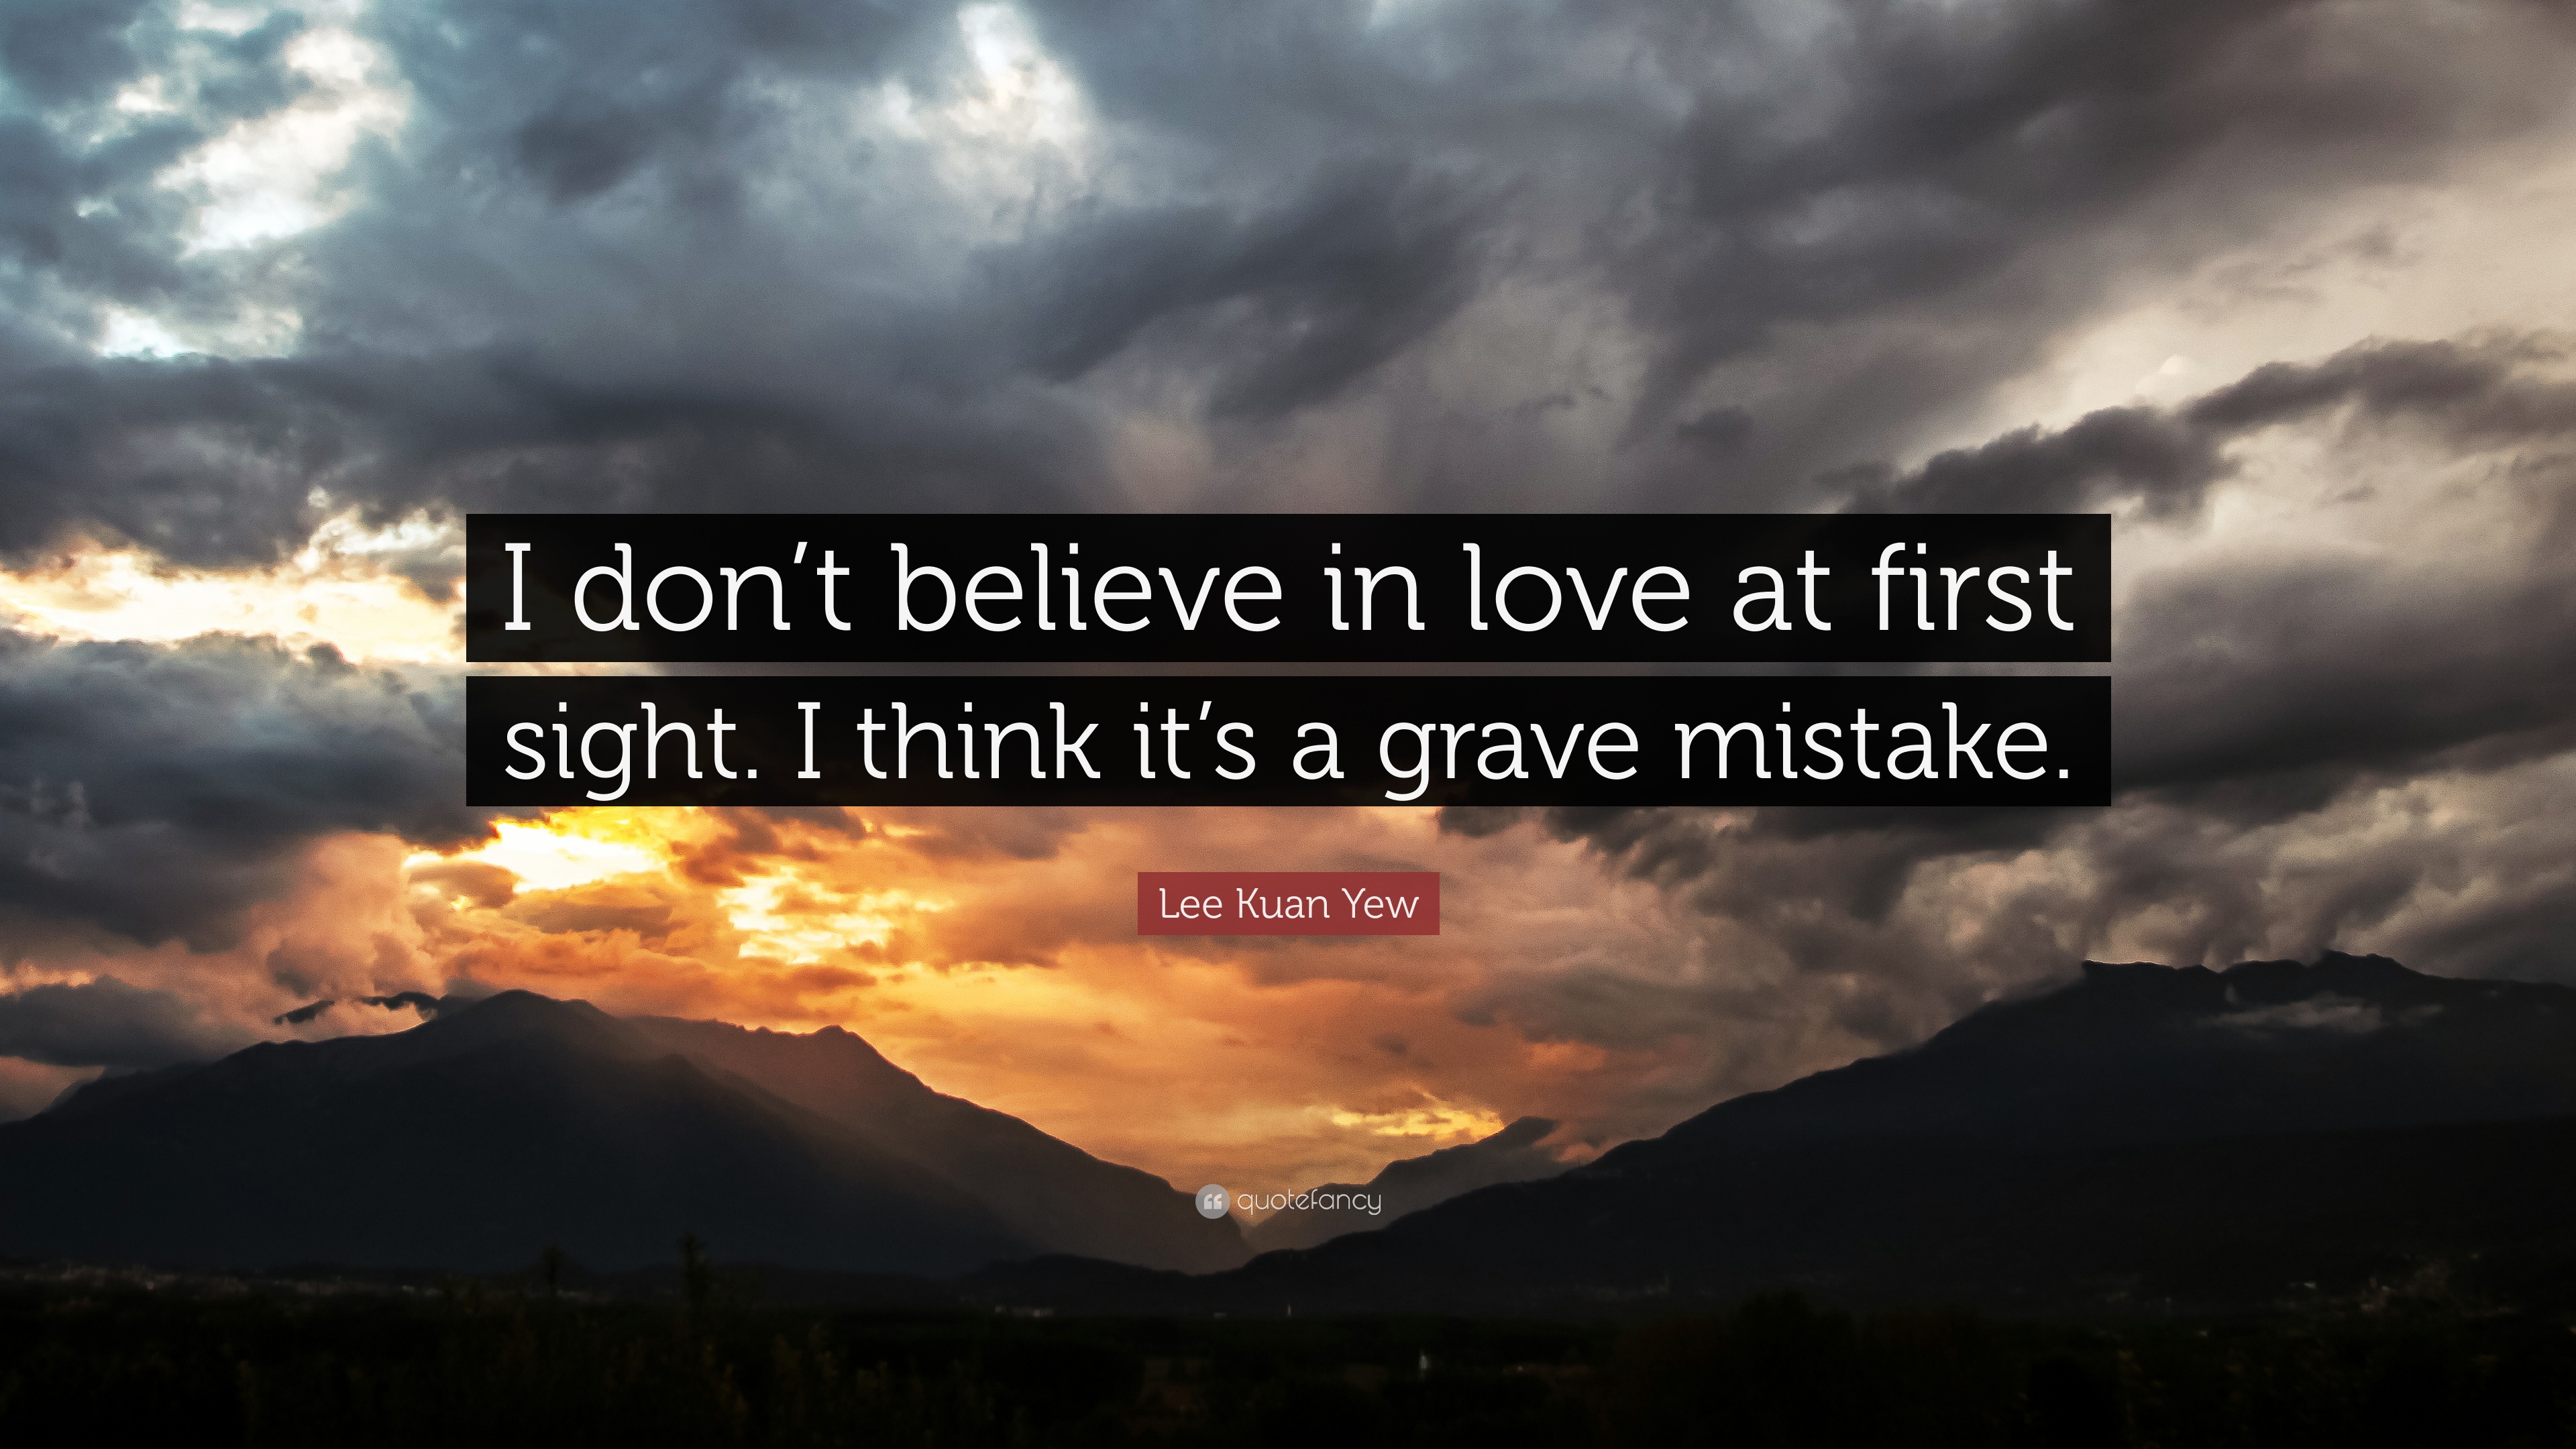 Lee Kuan Yew Quote “I don t believe in love at first sight